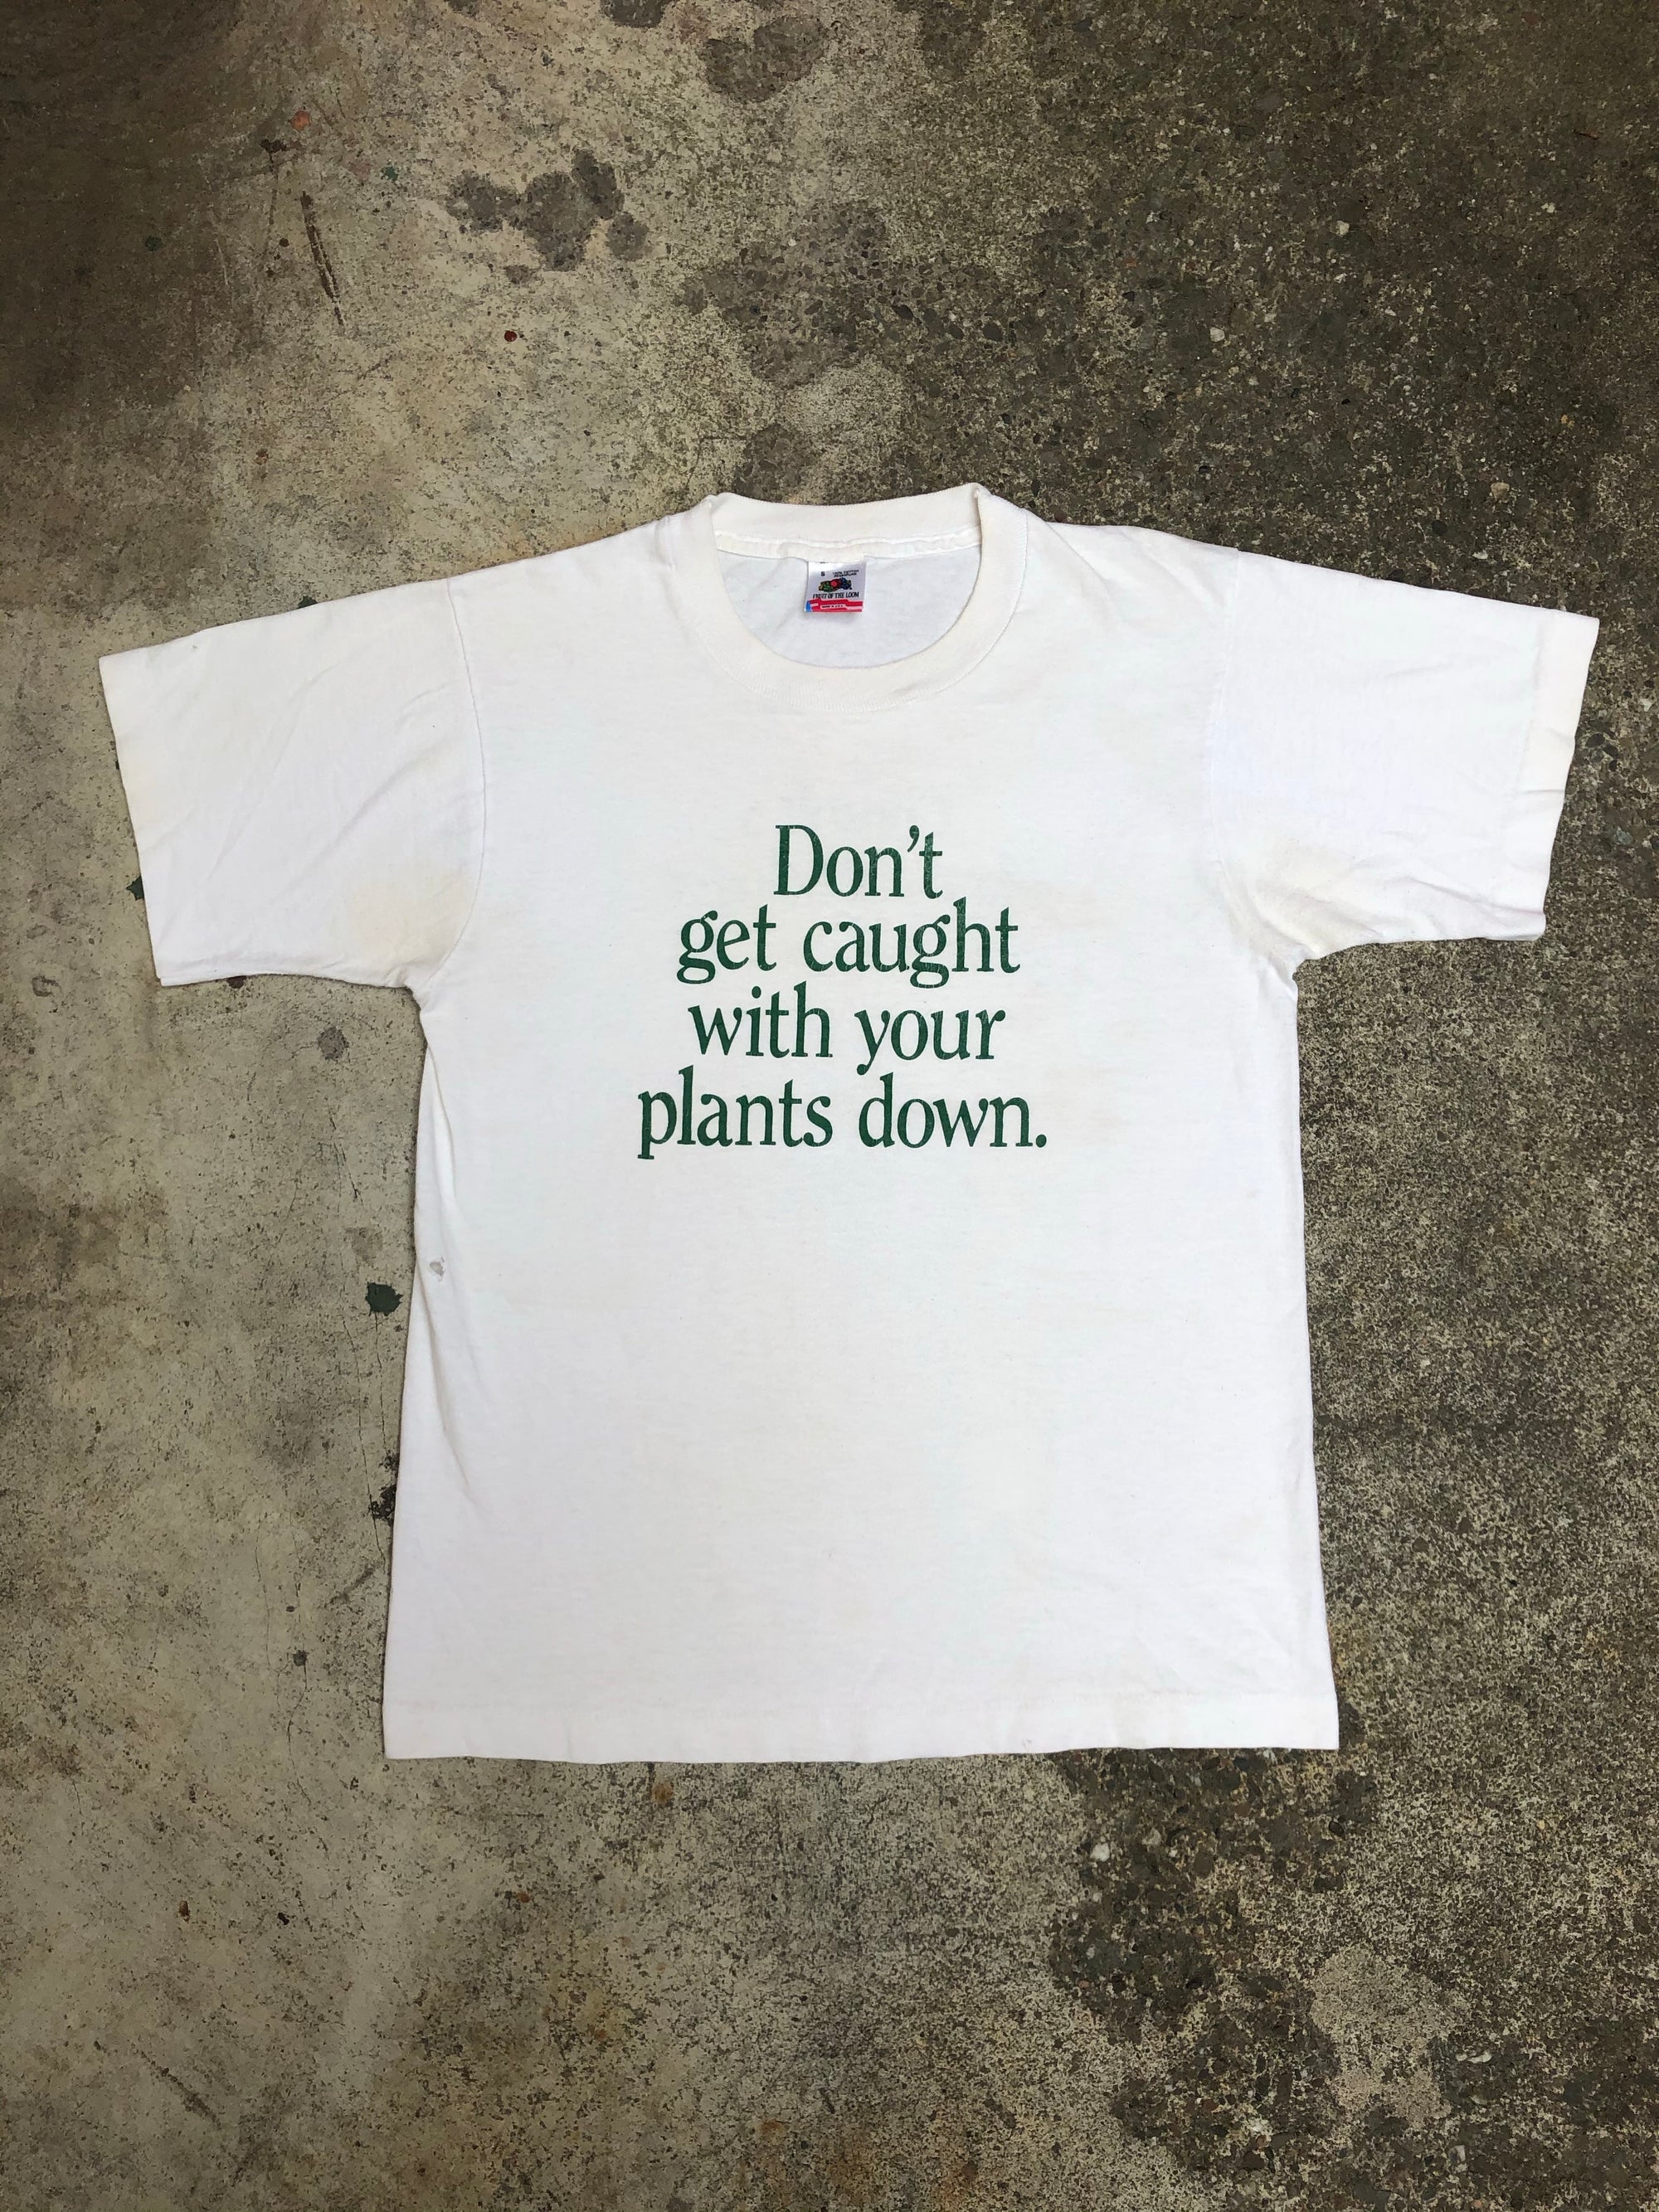 1990s Single Stitched “Don’t Get Caught With Your Plants Down” Tee